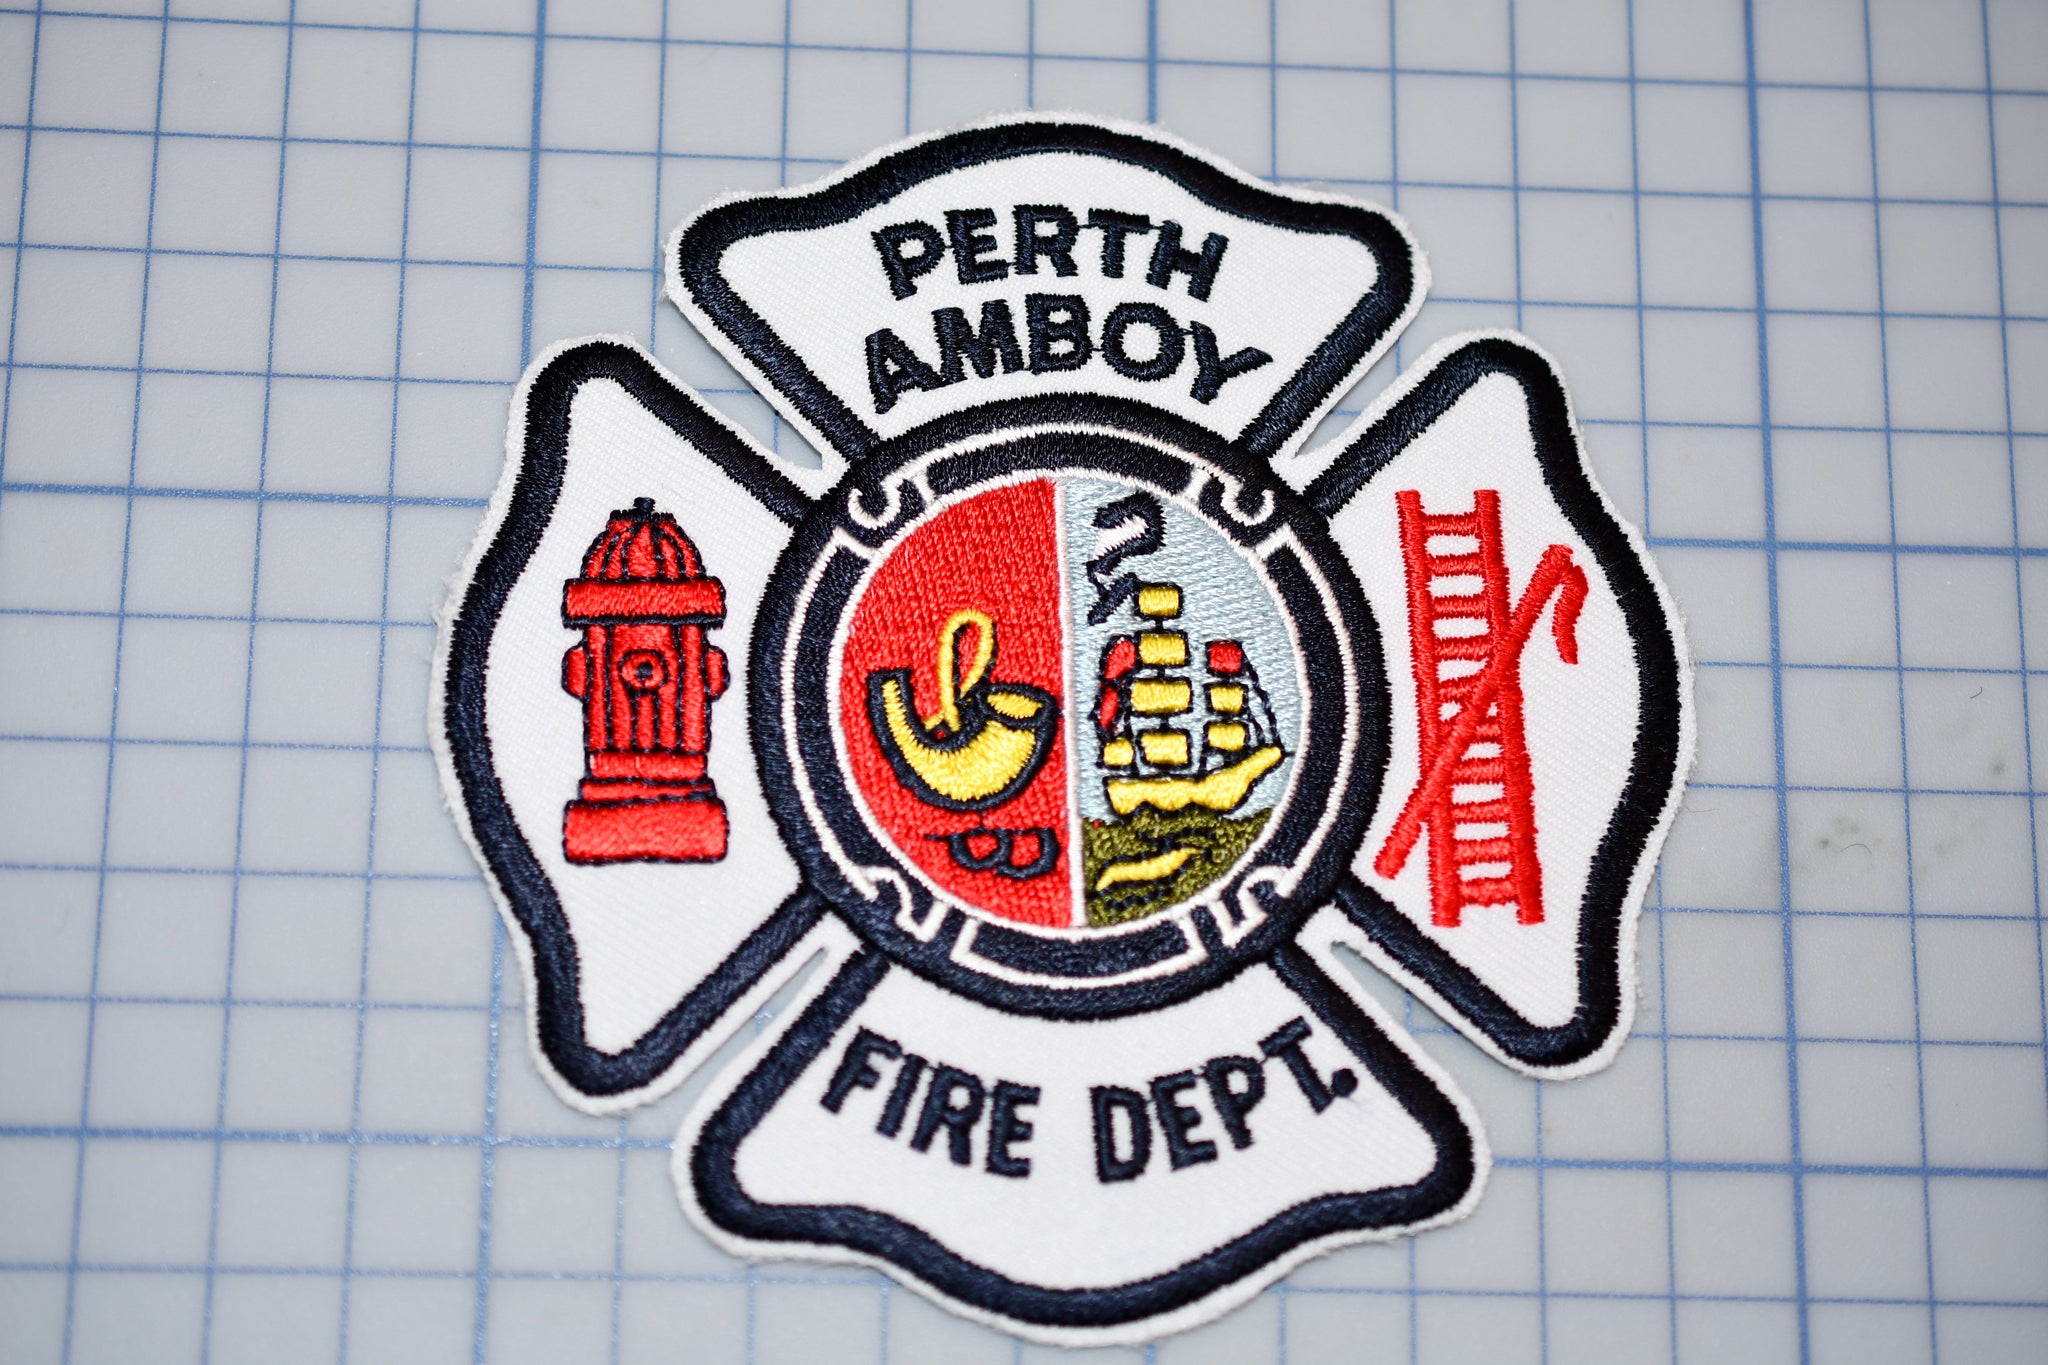 Perth Amboy New Jersey Fire Department Patch (B29-363)